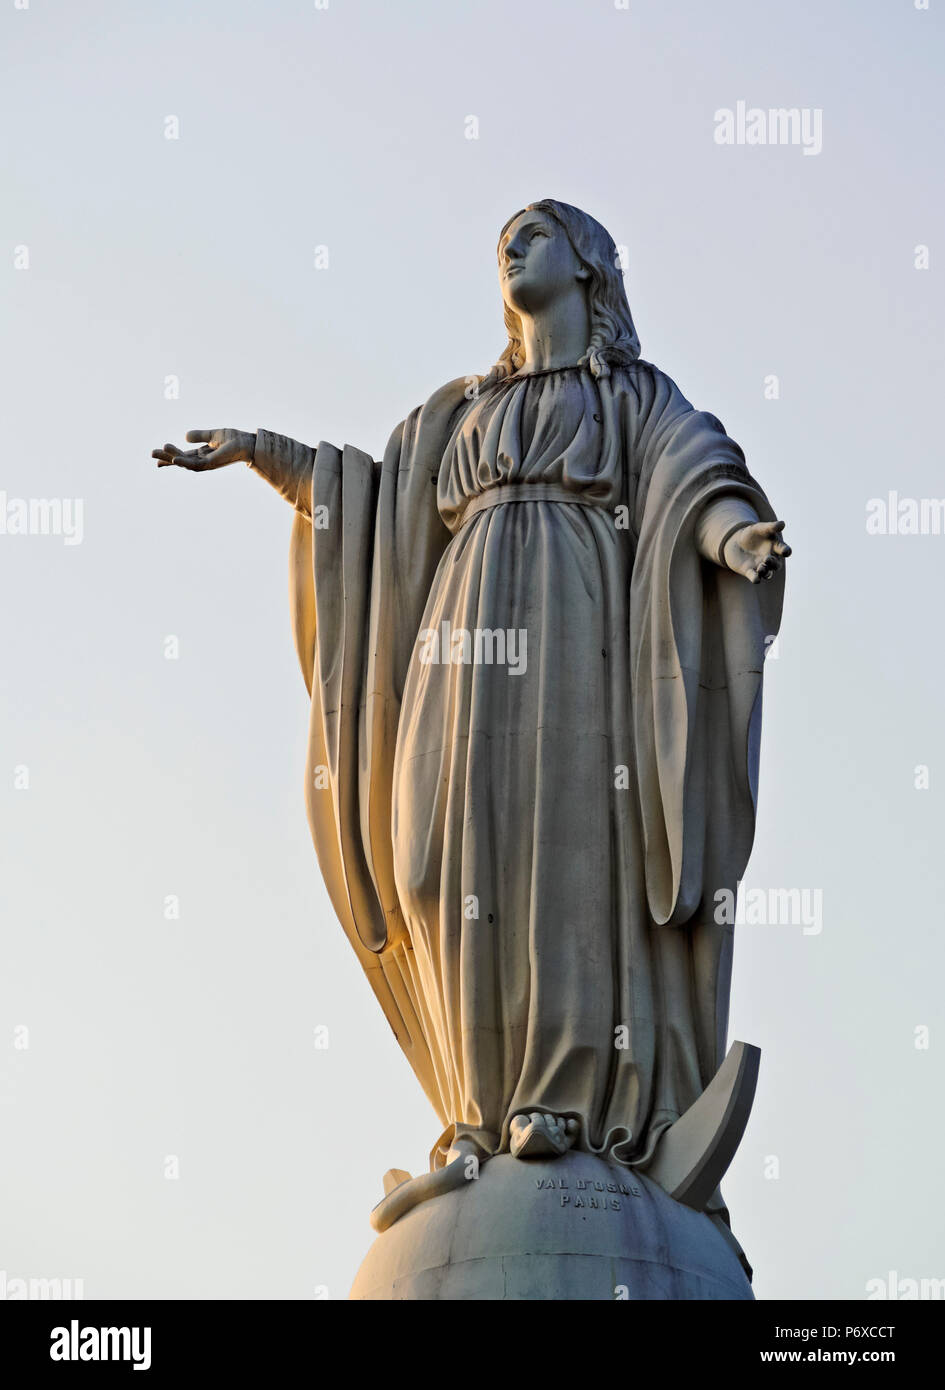 Chile, Santiago, Statue of the Virgin Mary on the top of the San Cristobal Hill. Stock Photo